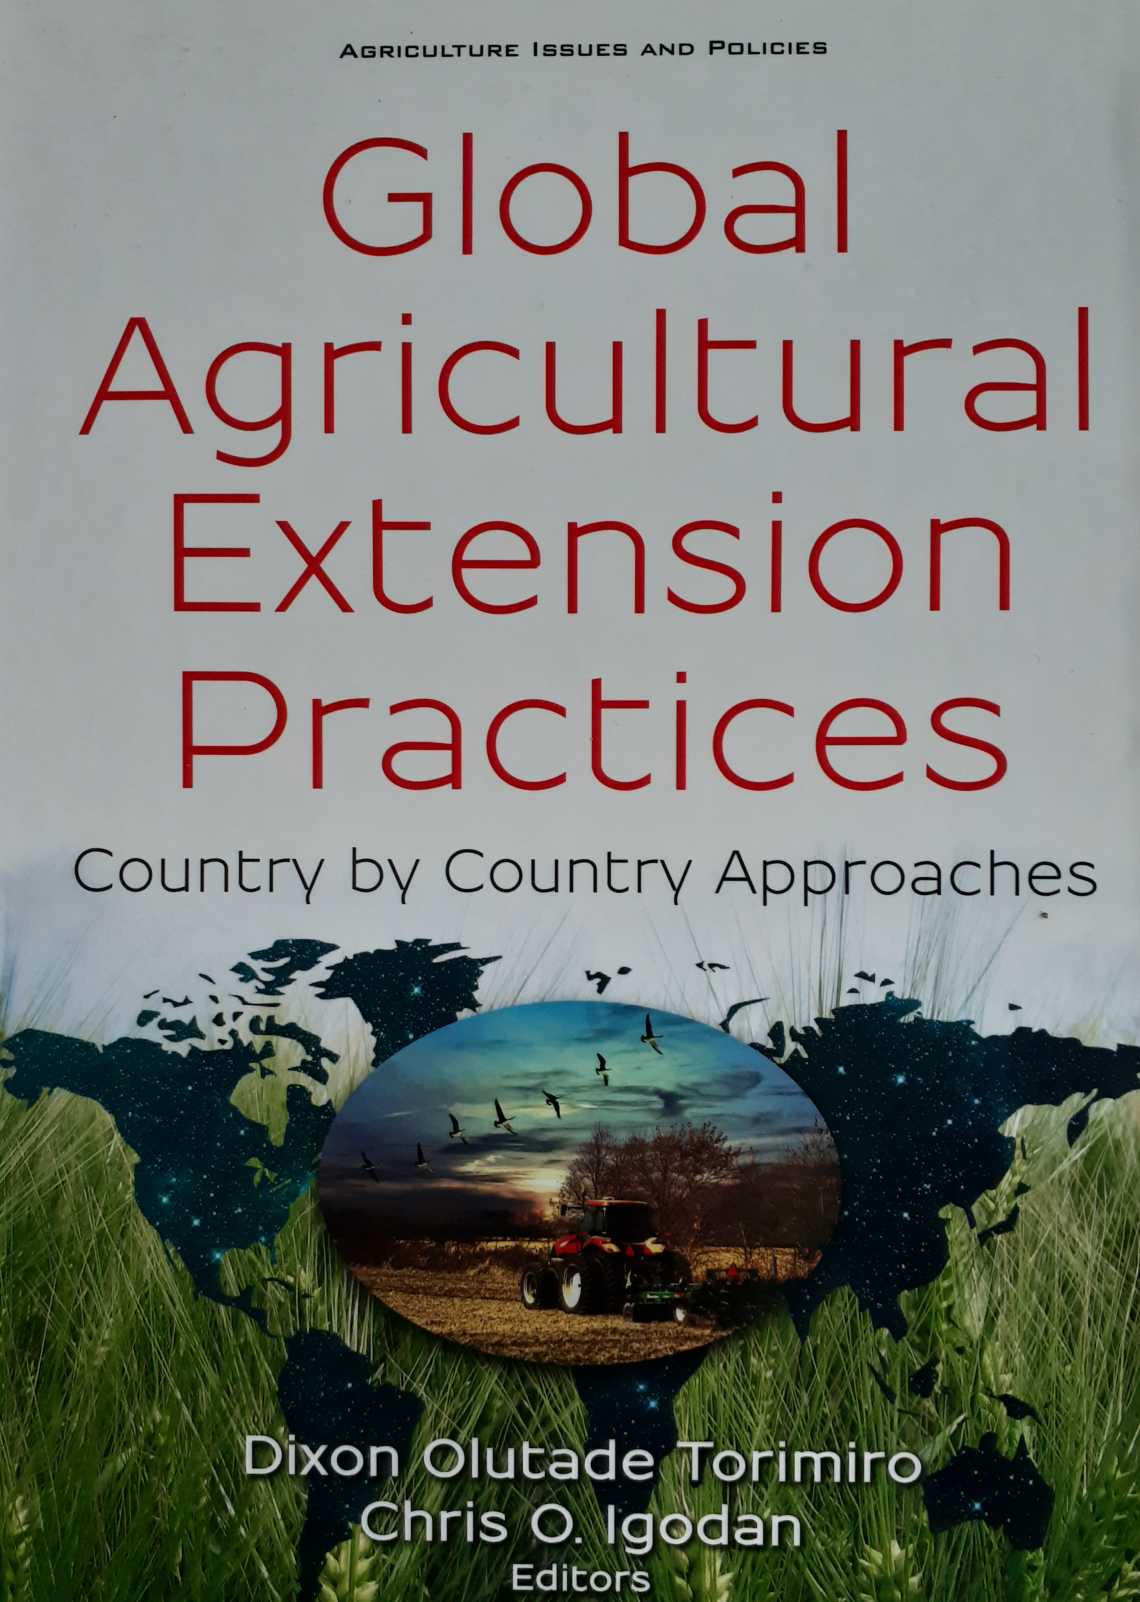 Global agricultural extension practices